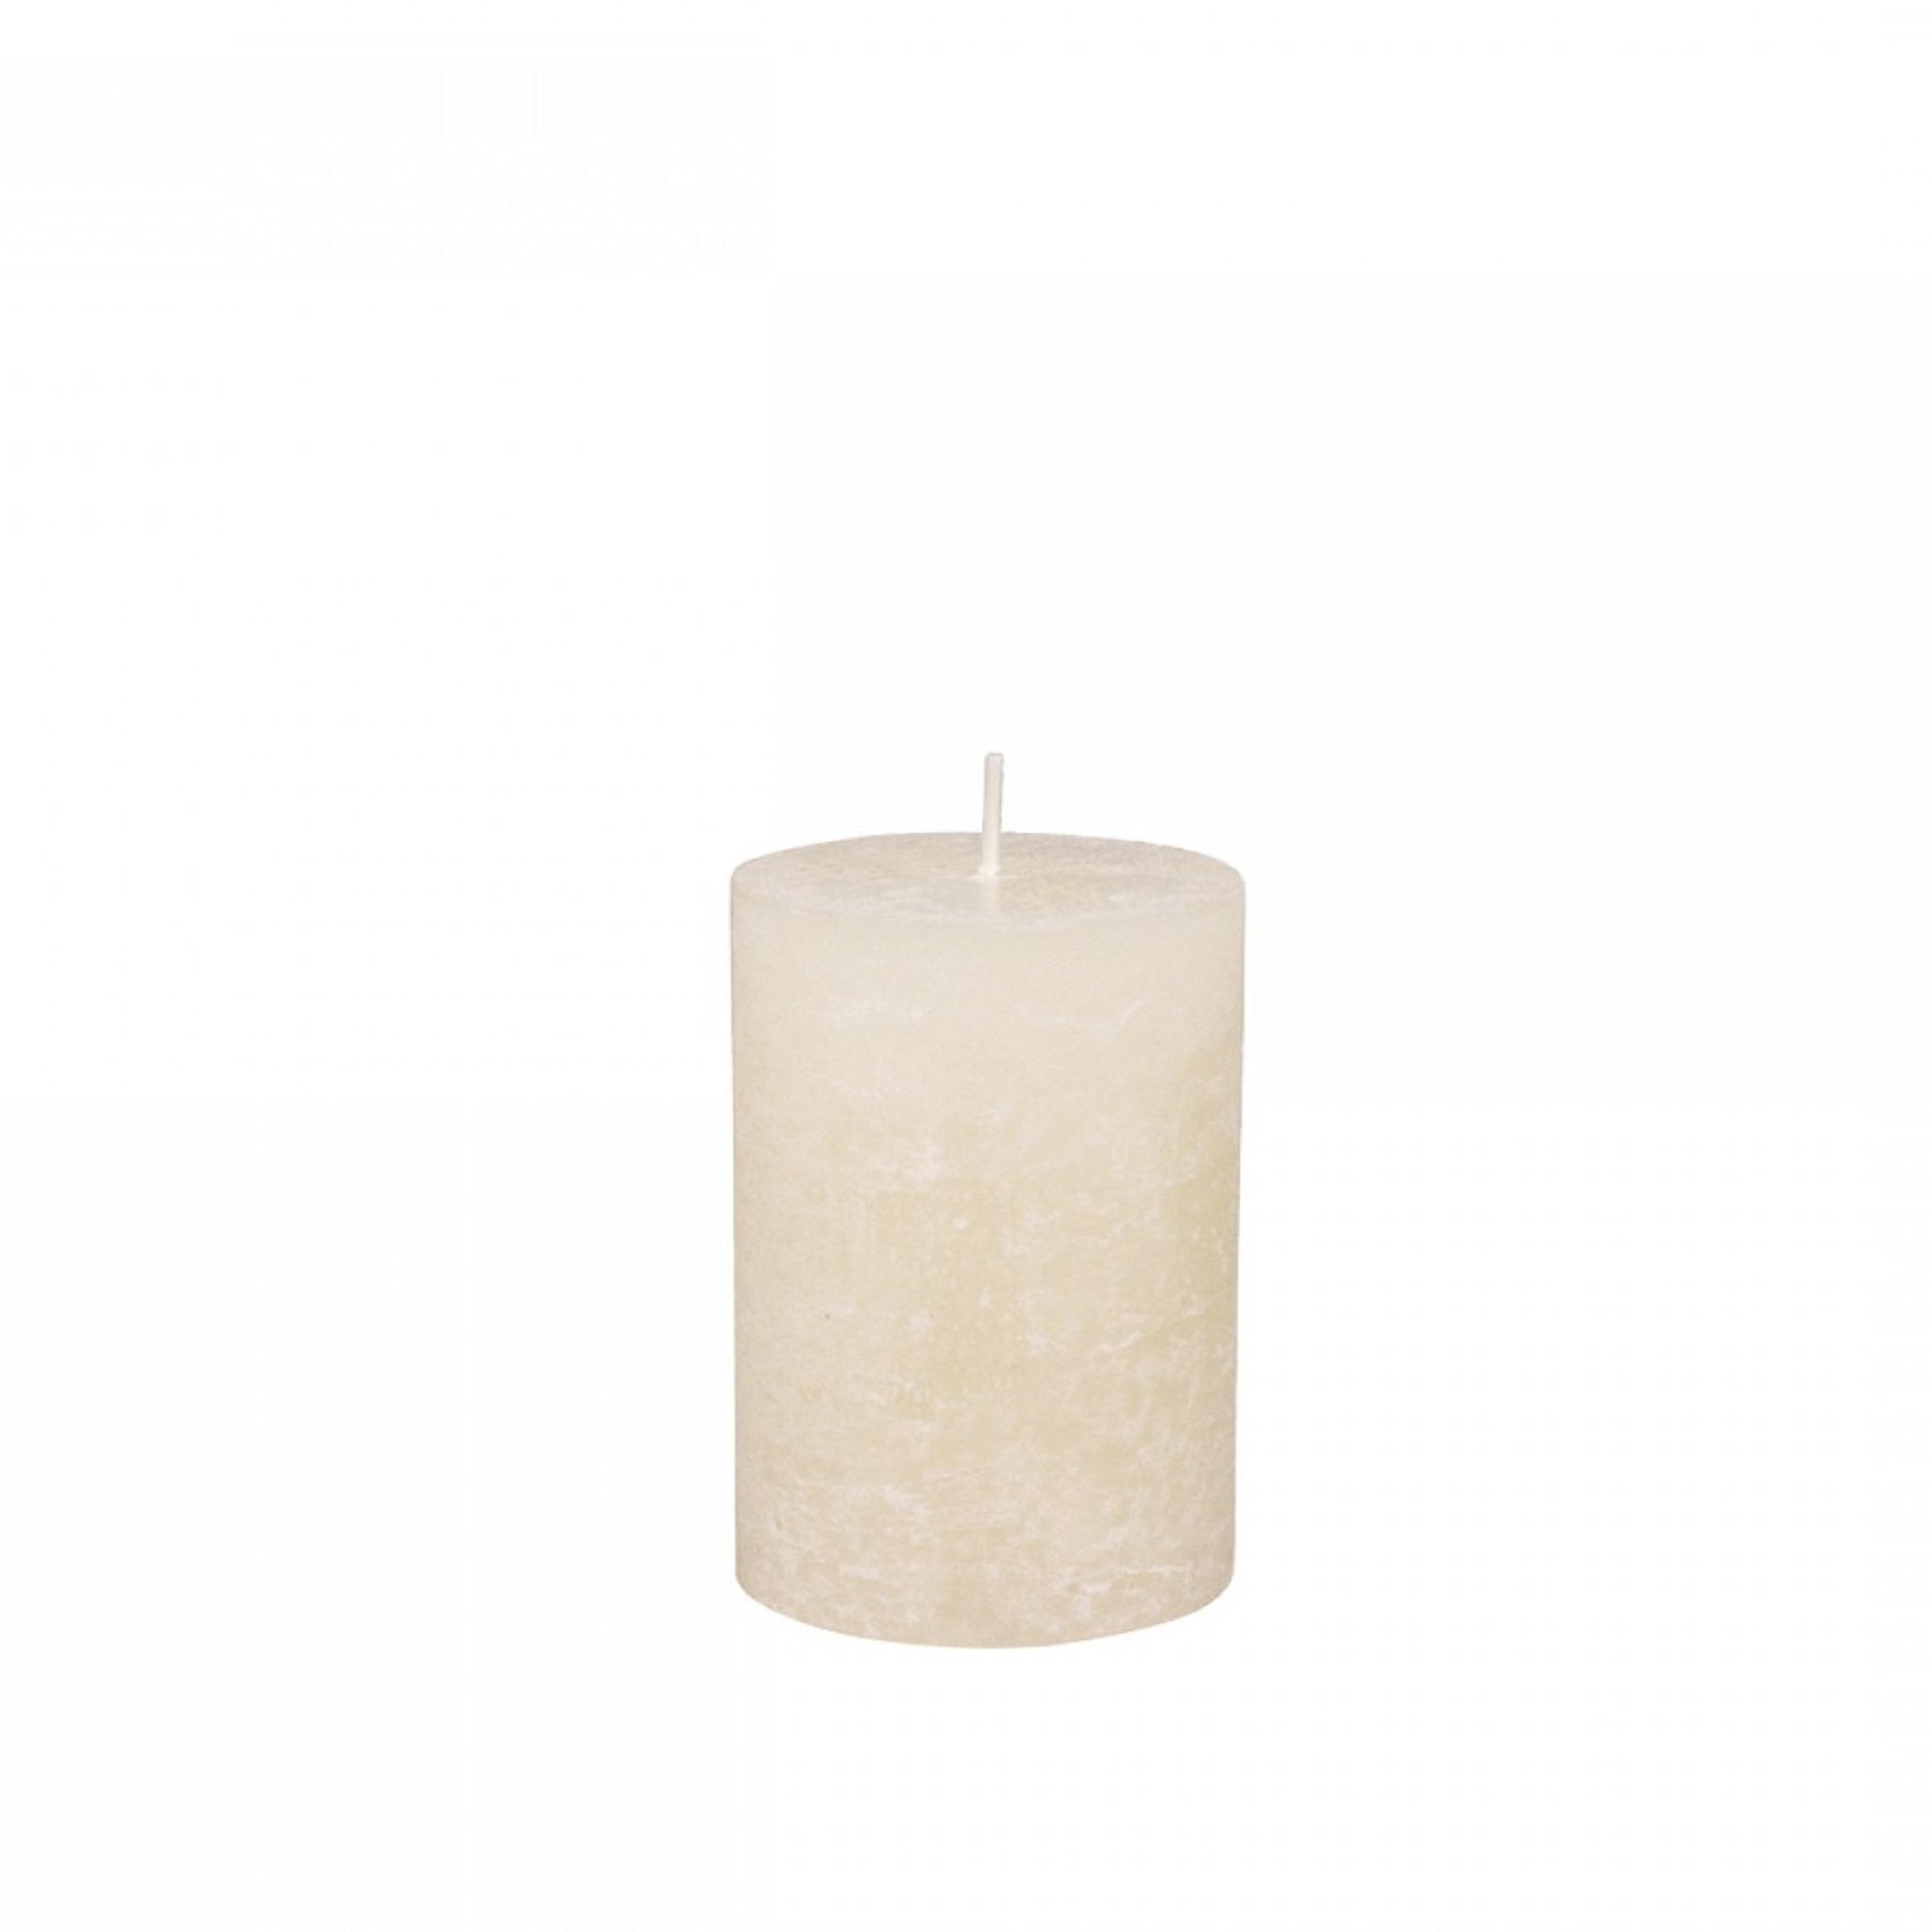 Cream Rustic Pillar Candle 40 hours - Bumble Living